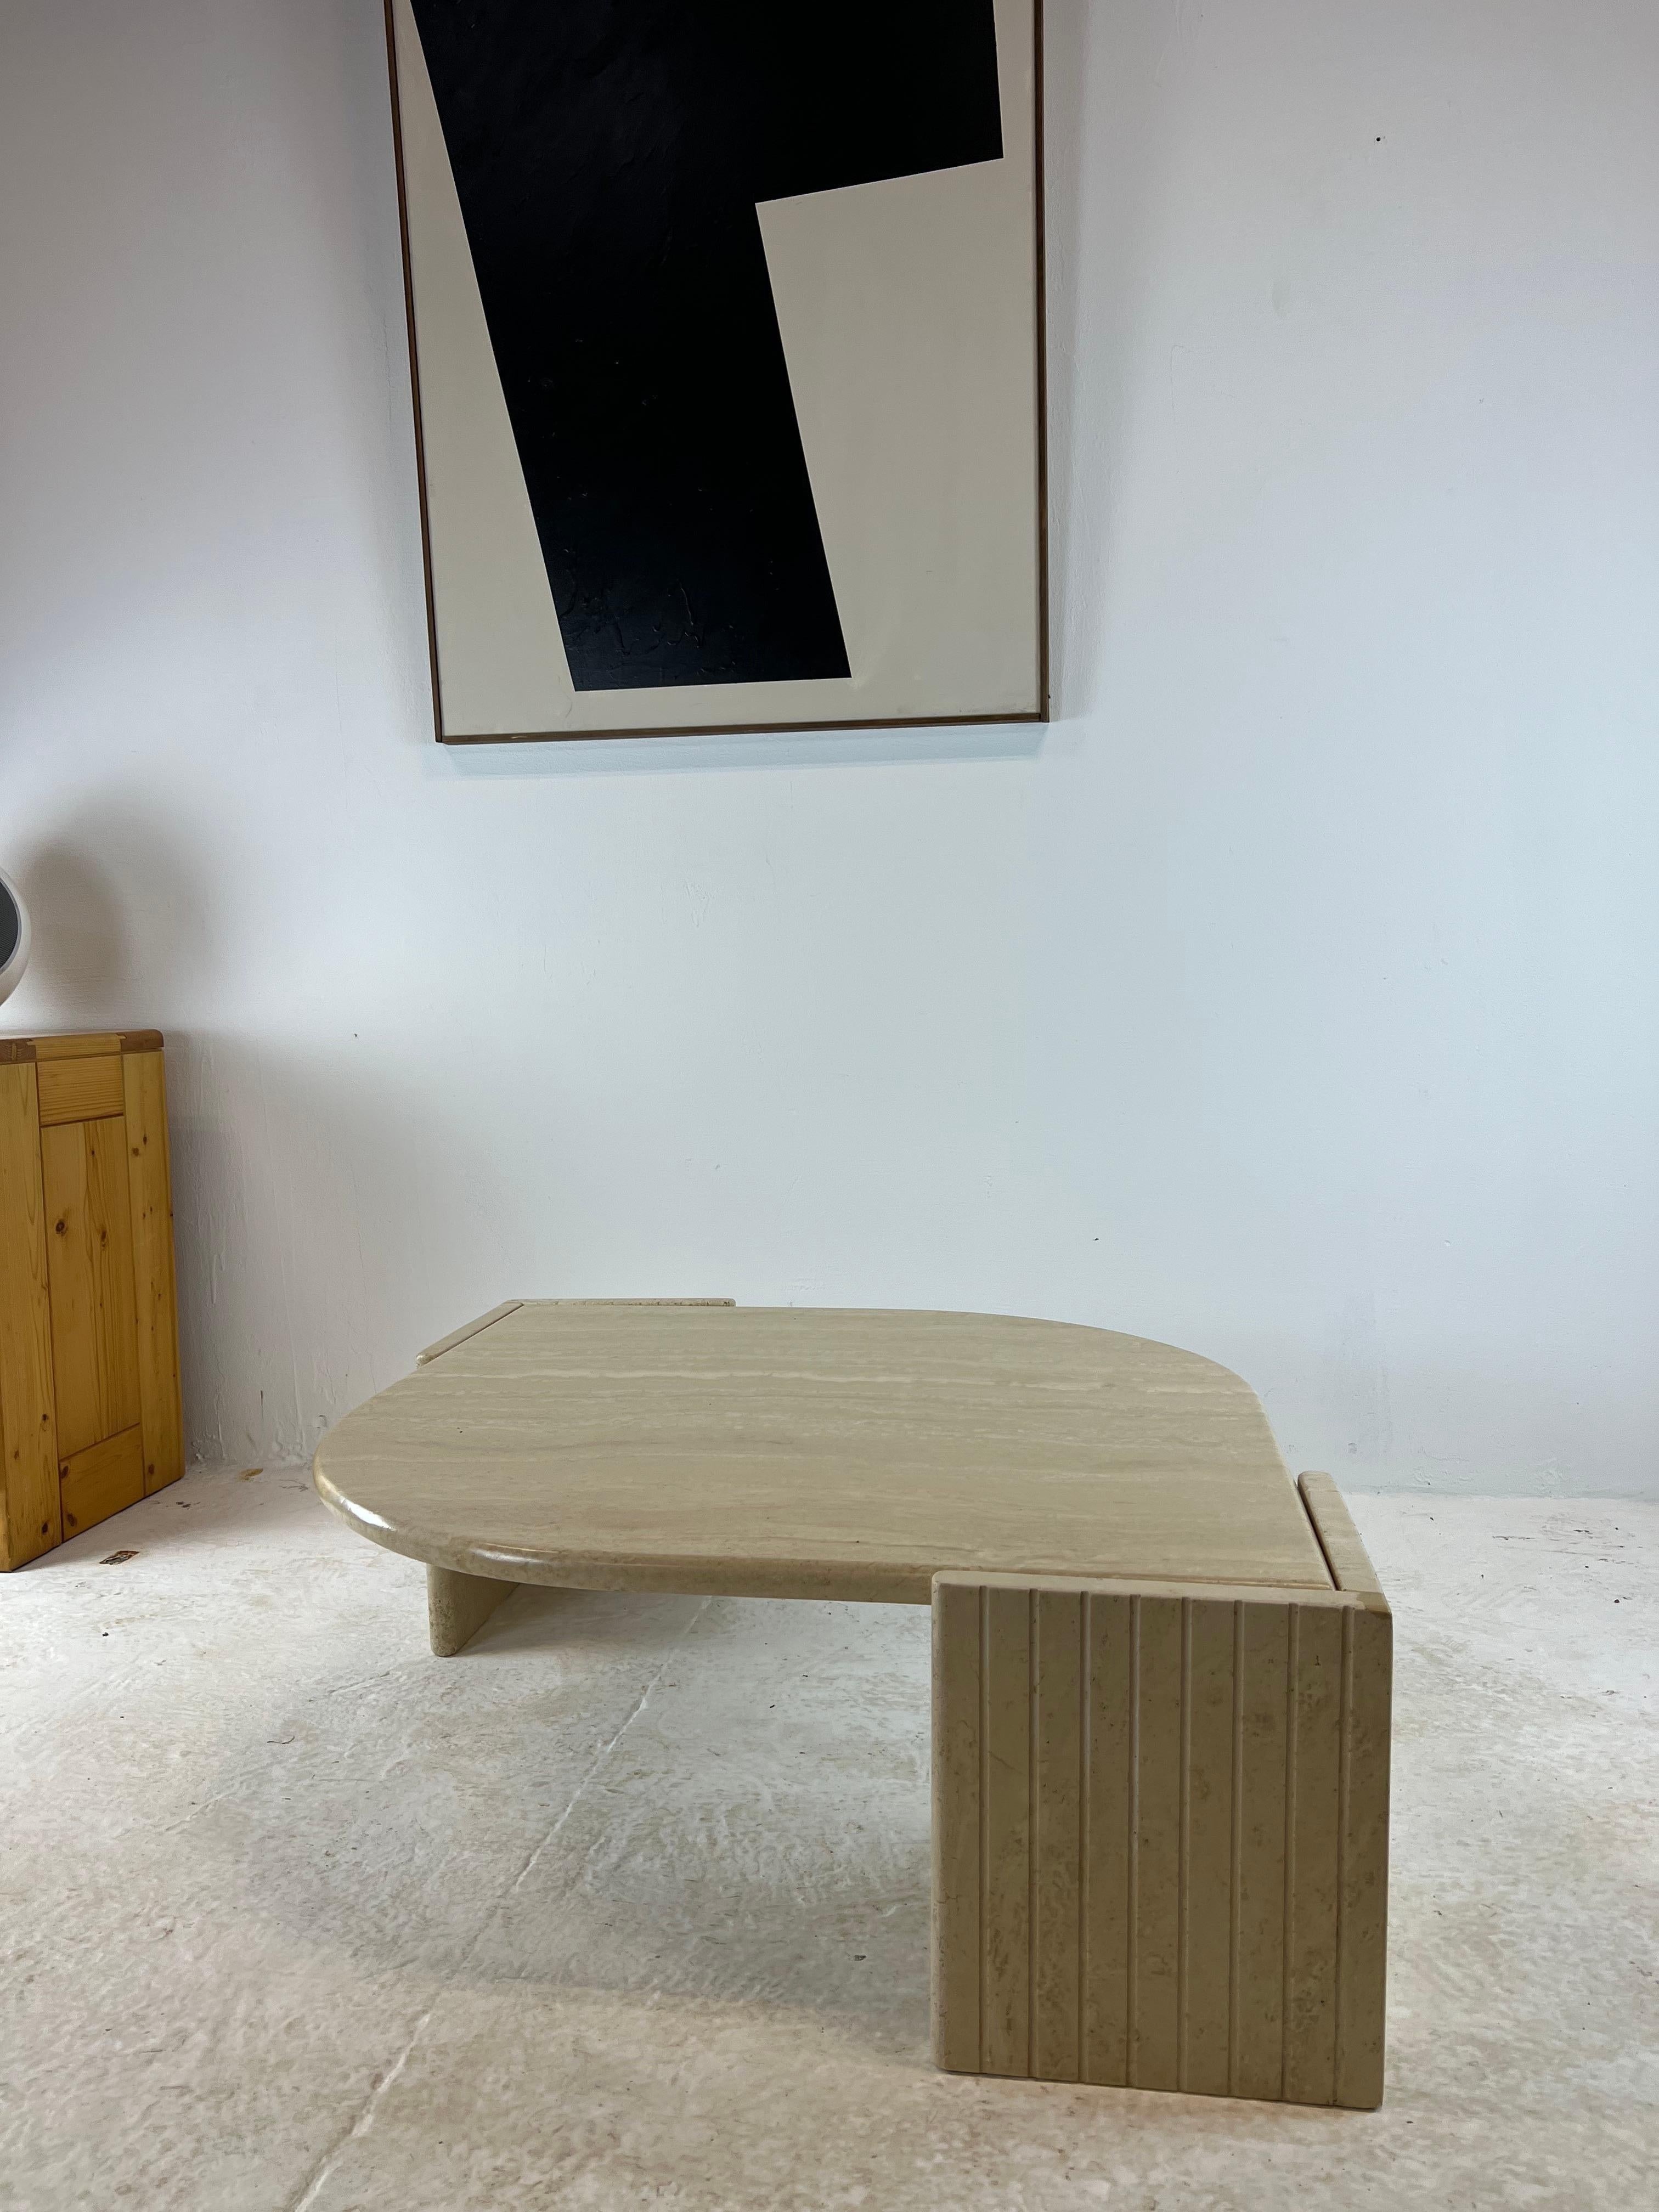 Iconic coffee table in the shape of an eye produced by roche bobois in the 70s. In travertine, its base accommodates the teardrop top which is housed there. Heavy and robust, its design is particularly attractive and it will fit perfectly into a